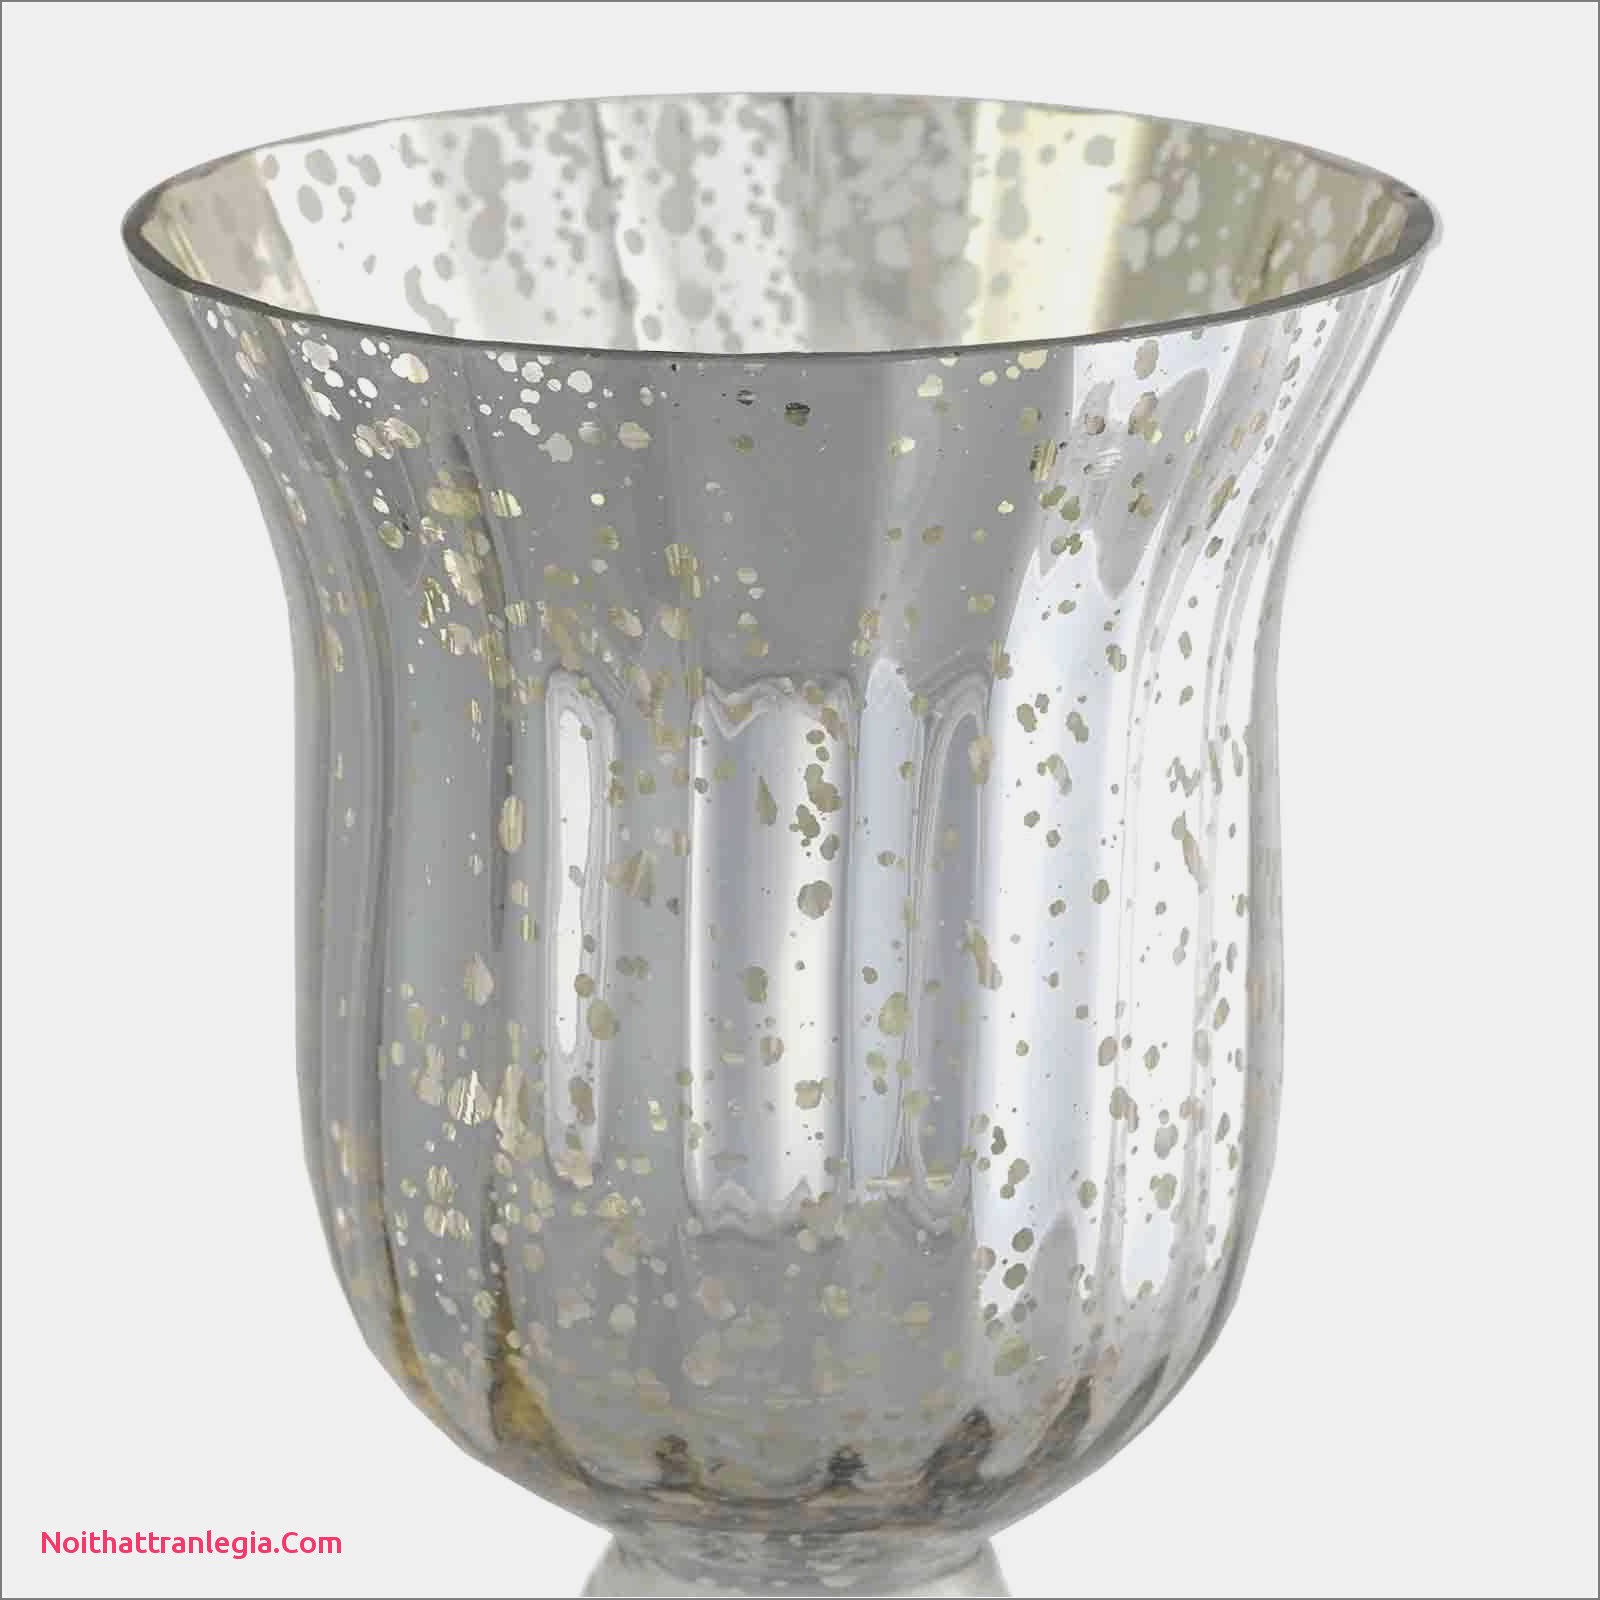 11 attractive Small Bud Vases Cheap 2024 free download small bud vases cheap of 20 wedding vases noithattranlegia vases design with regard to wedding guest gift ideas inspirational candles for wedding favors superb pe s5h vases candle vase i